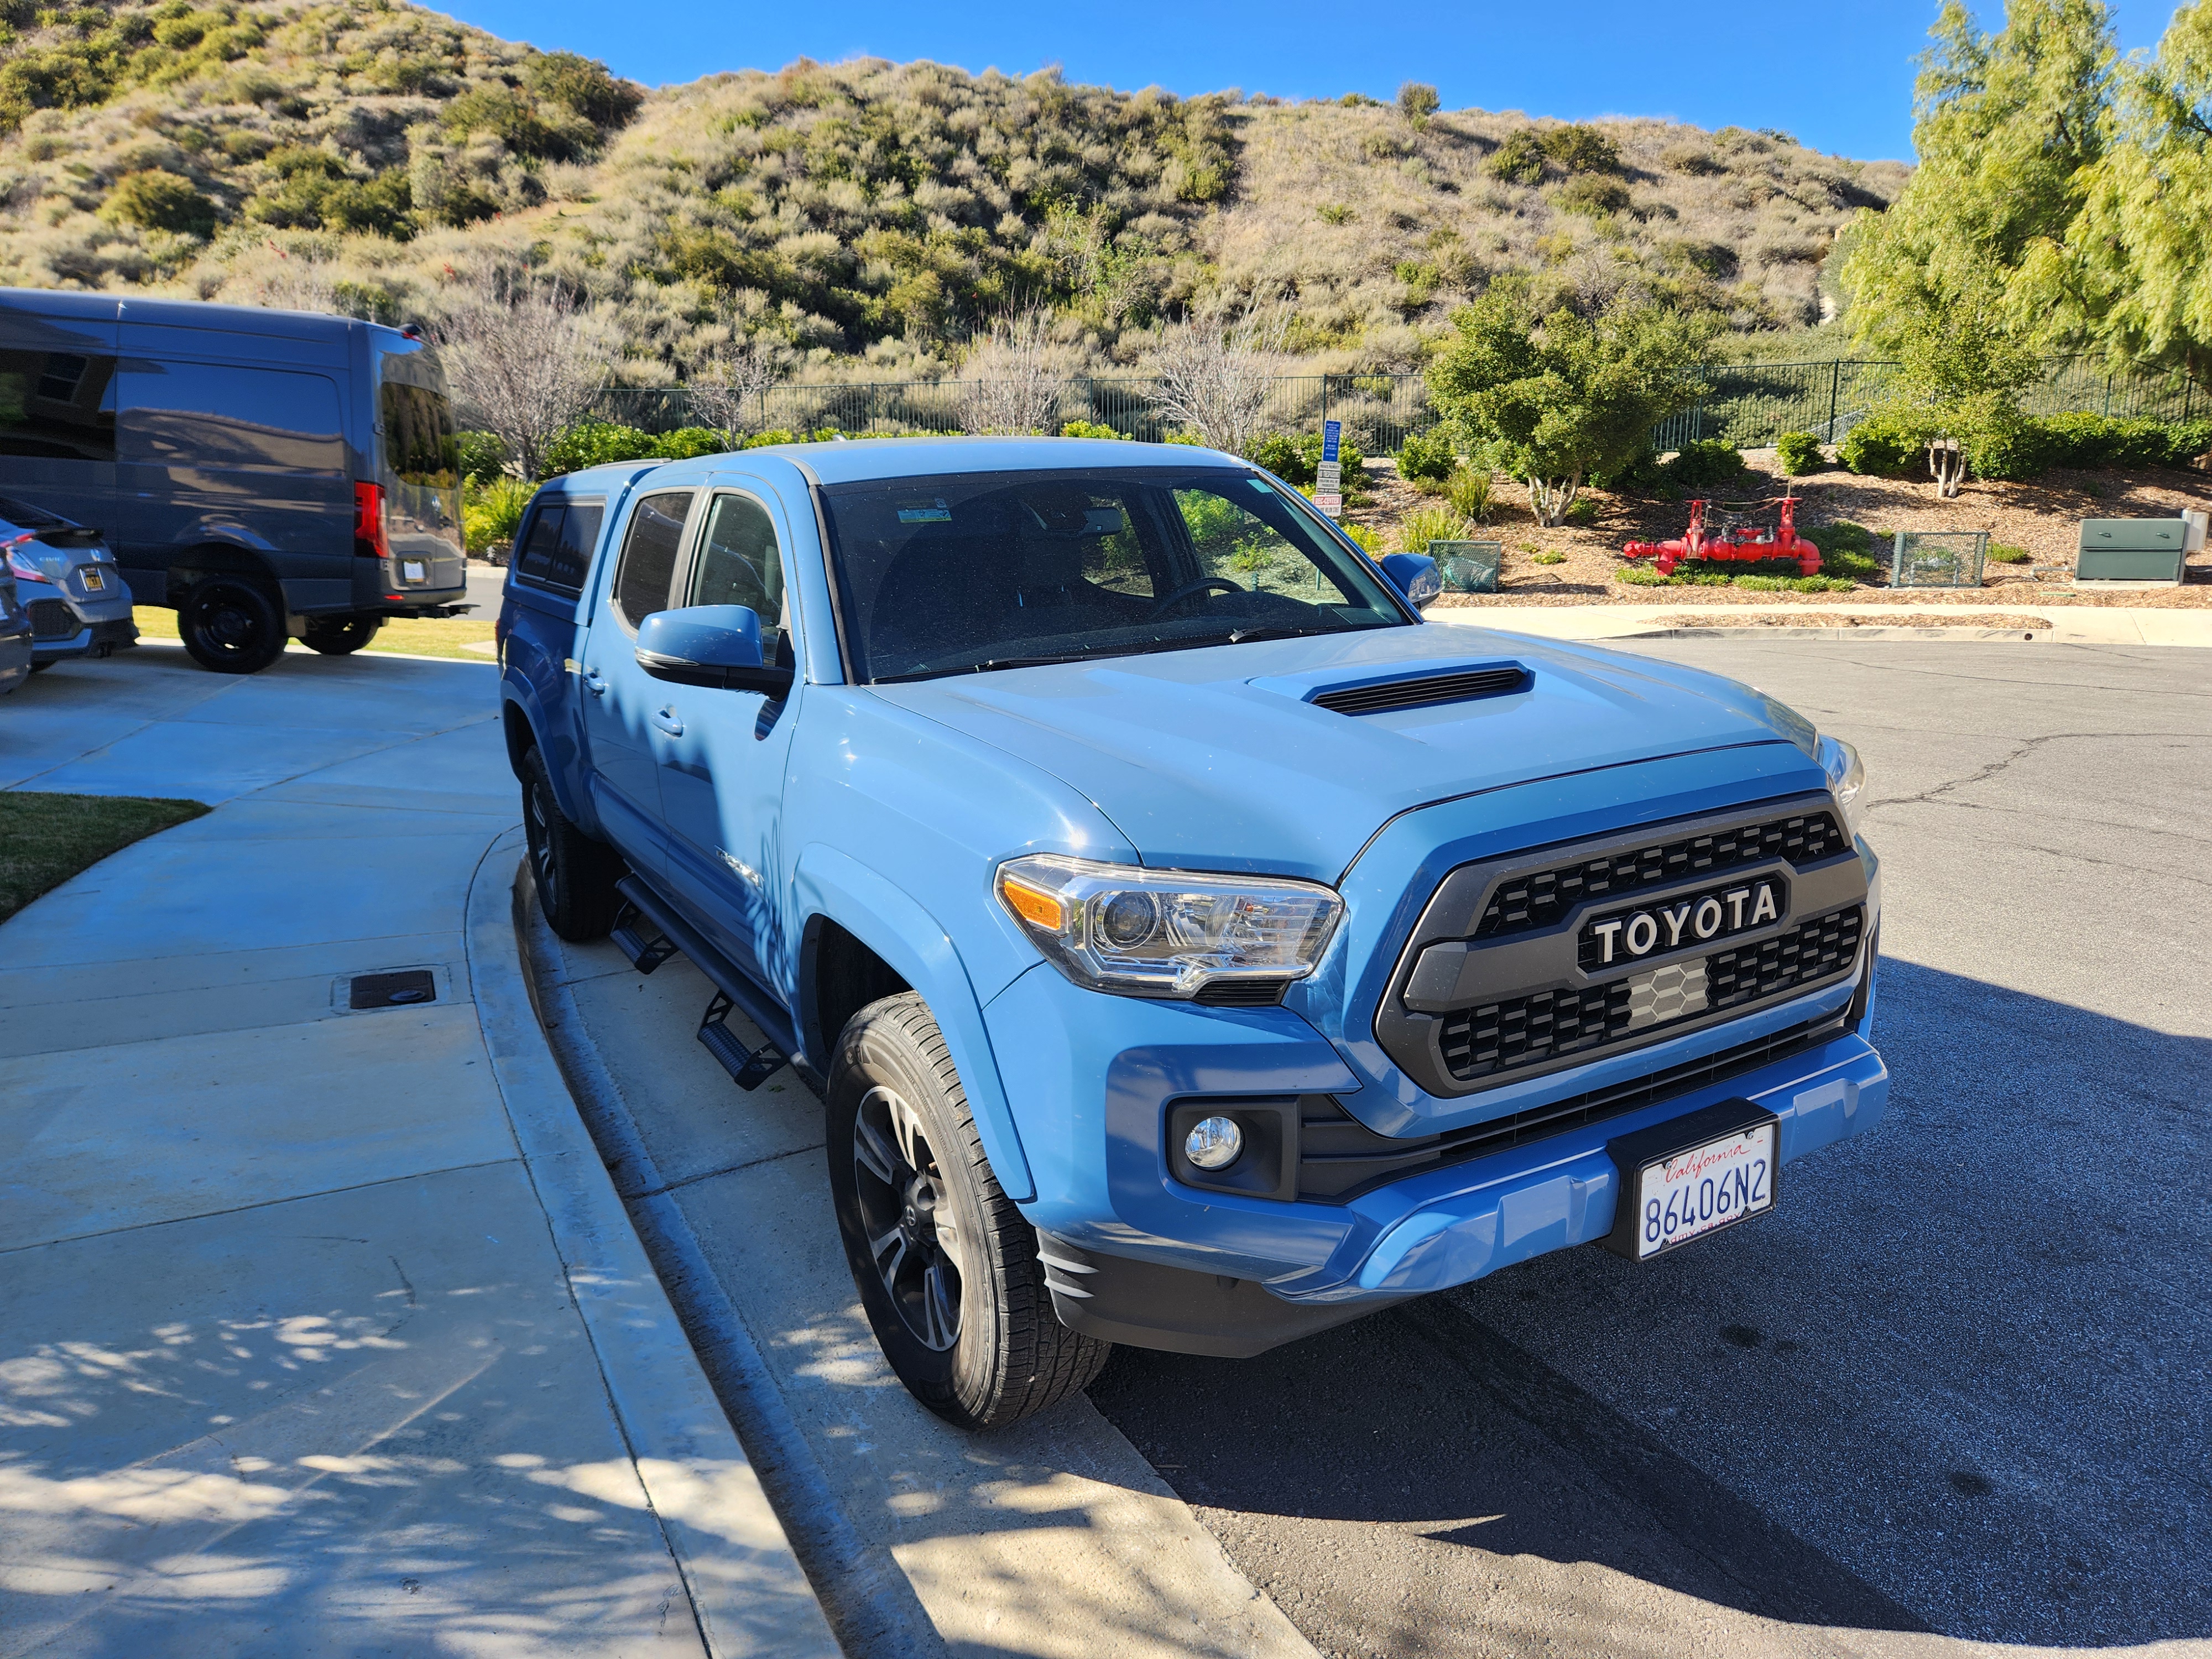 2019 Toyota Tacoma vs. 2019 Toyota Hilux: What's the Difference? -  Autotrader